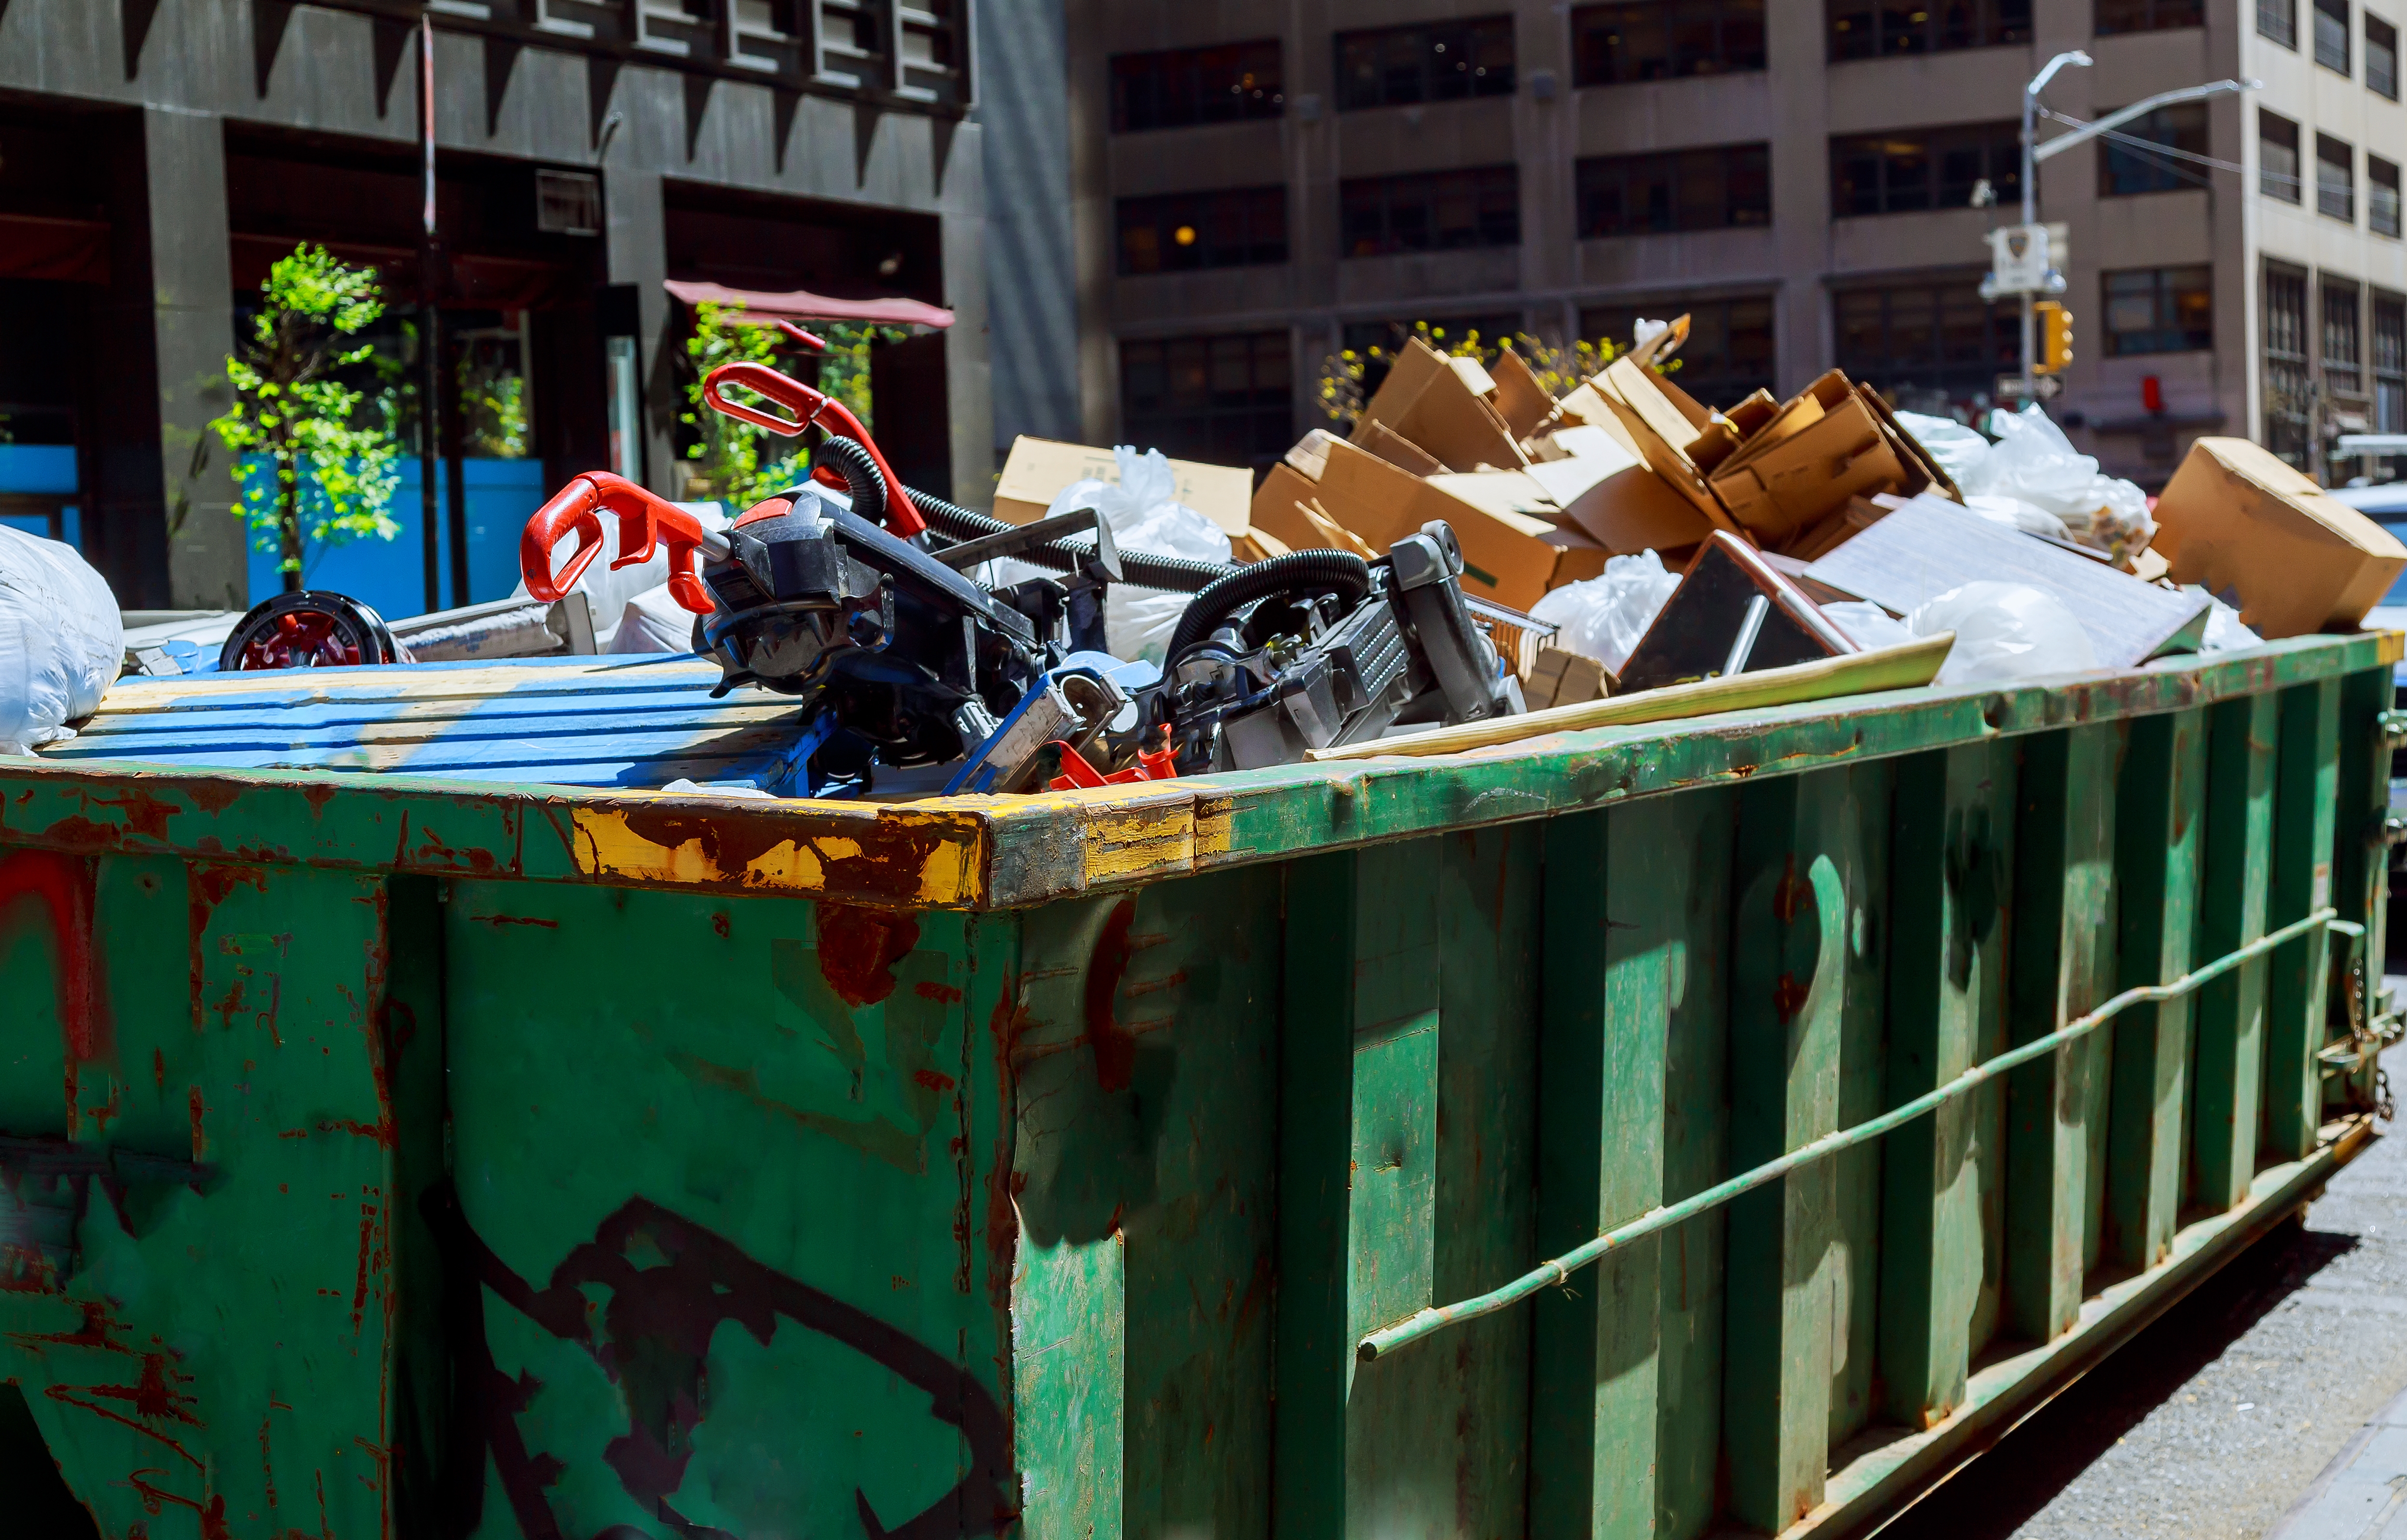 Central NJ Commercial Junk Removal Company